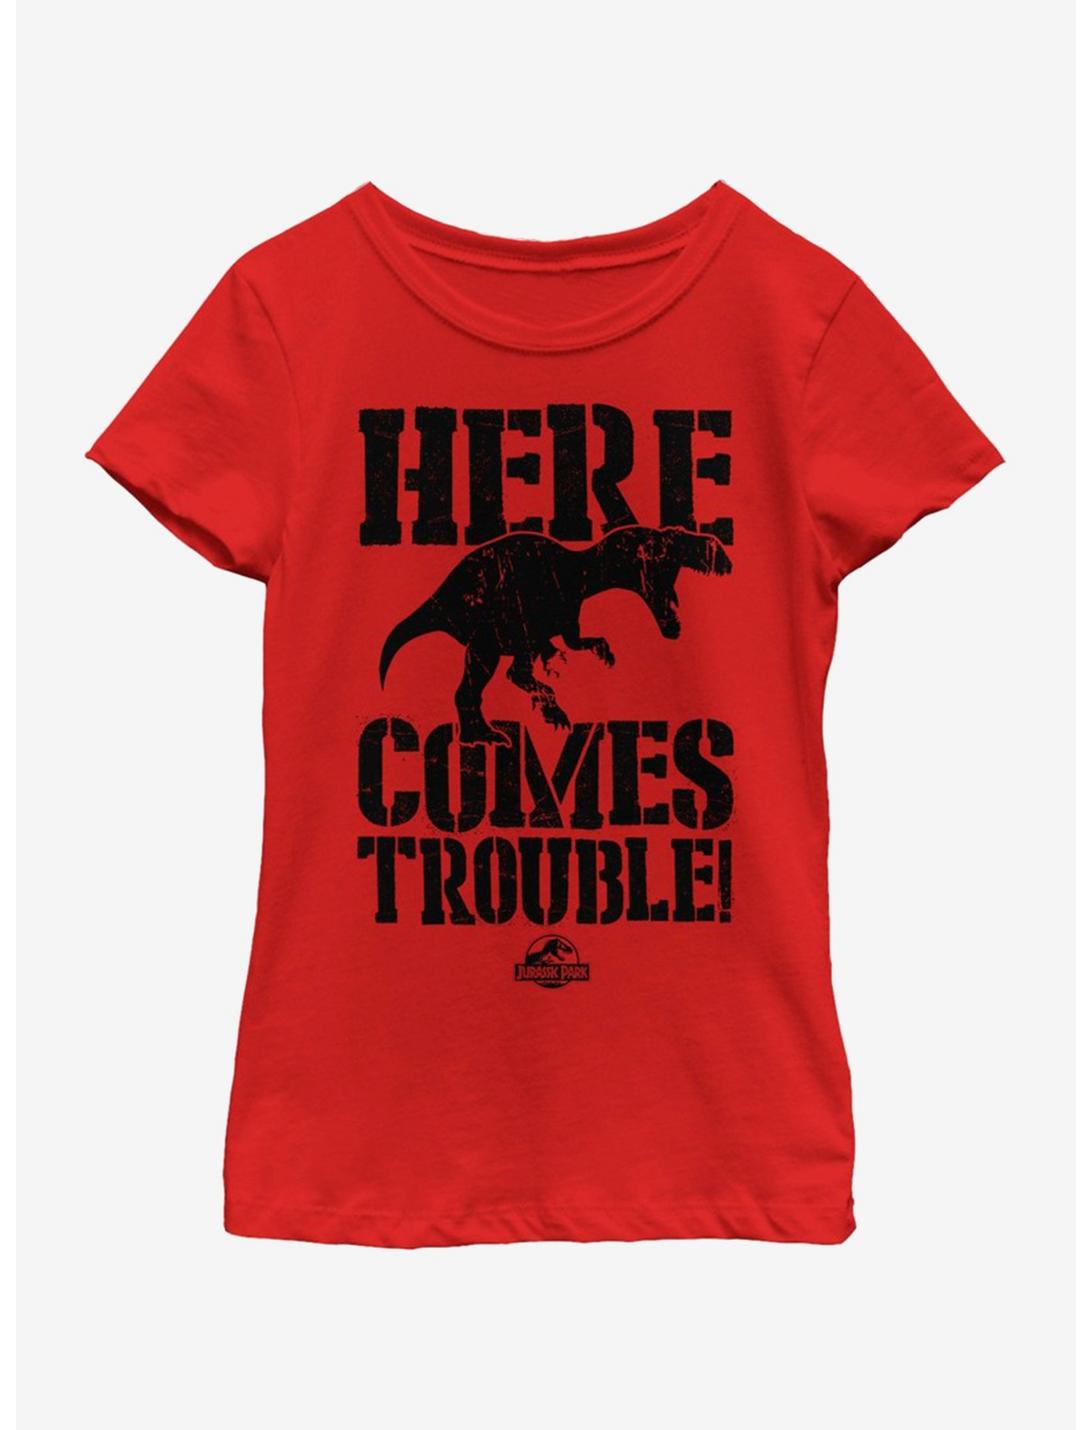 Jurassic Park Dino Trouble Youth Girls T-Shirt, RED, hi-res